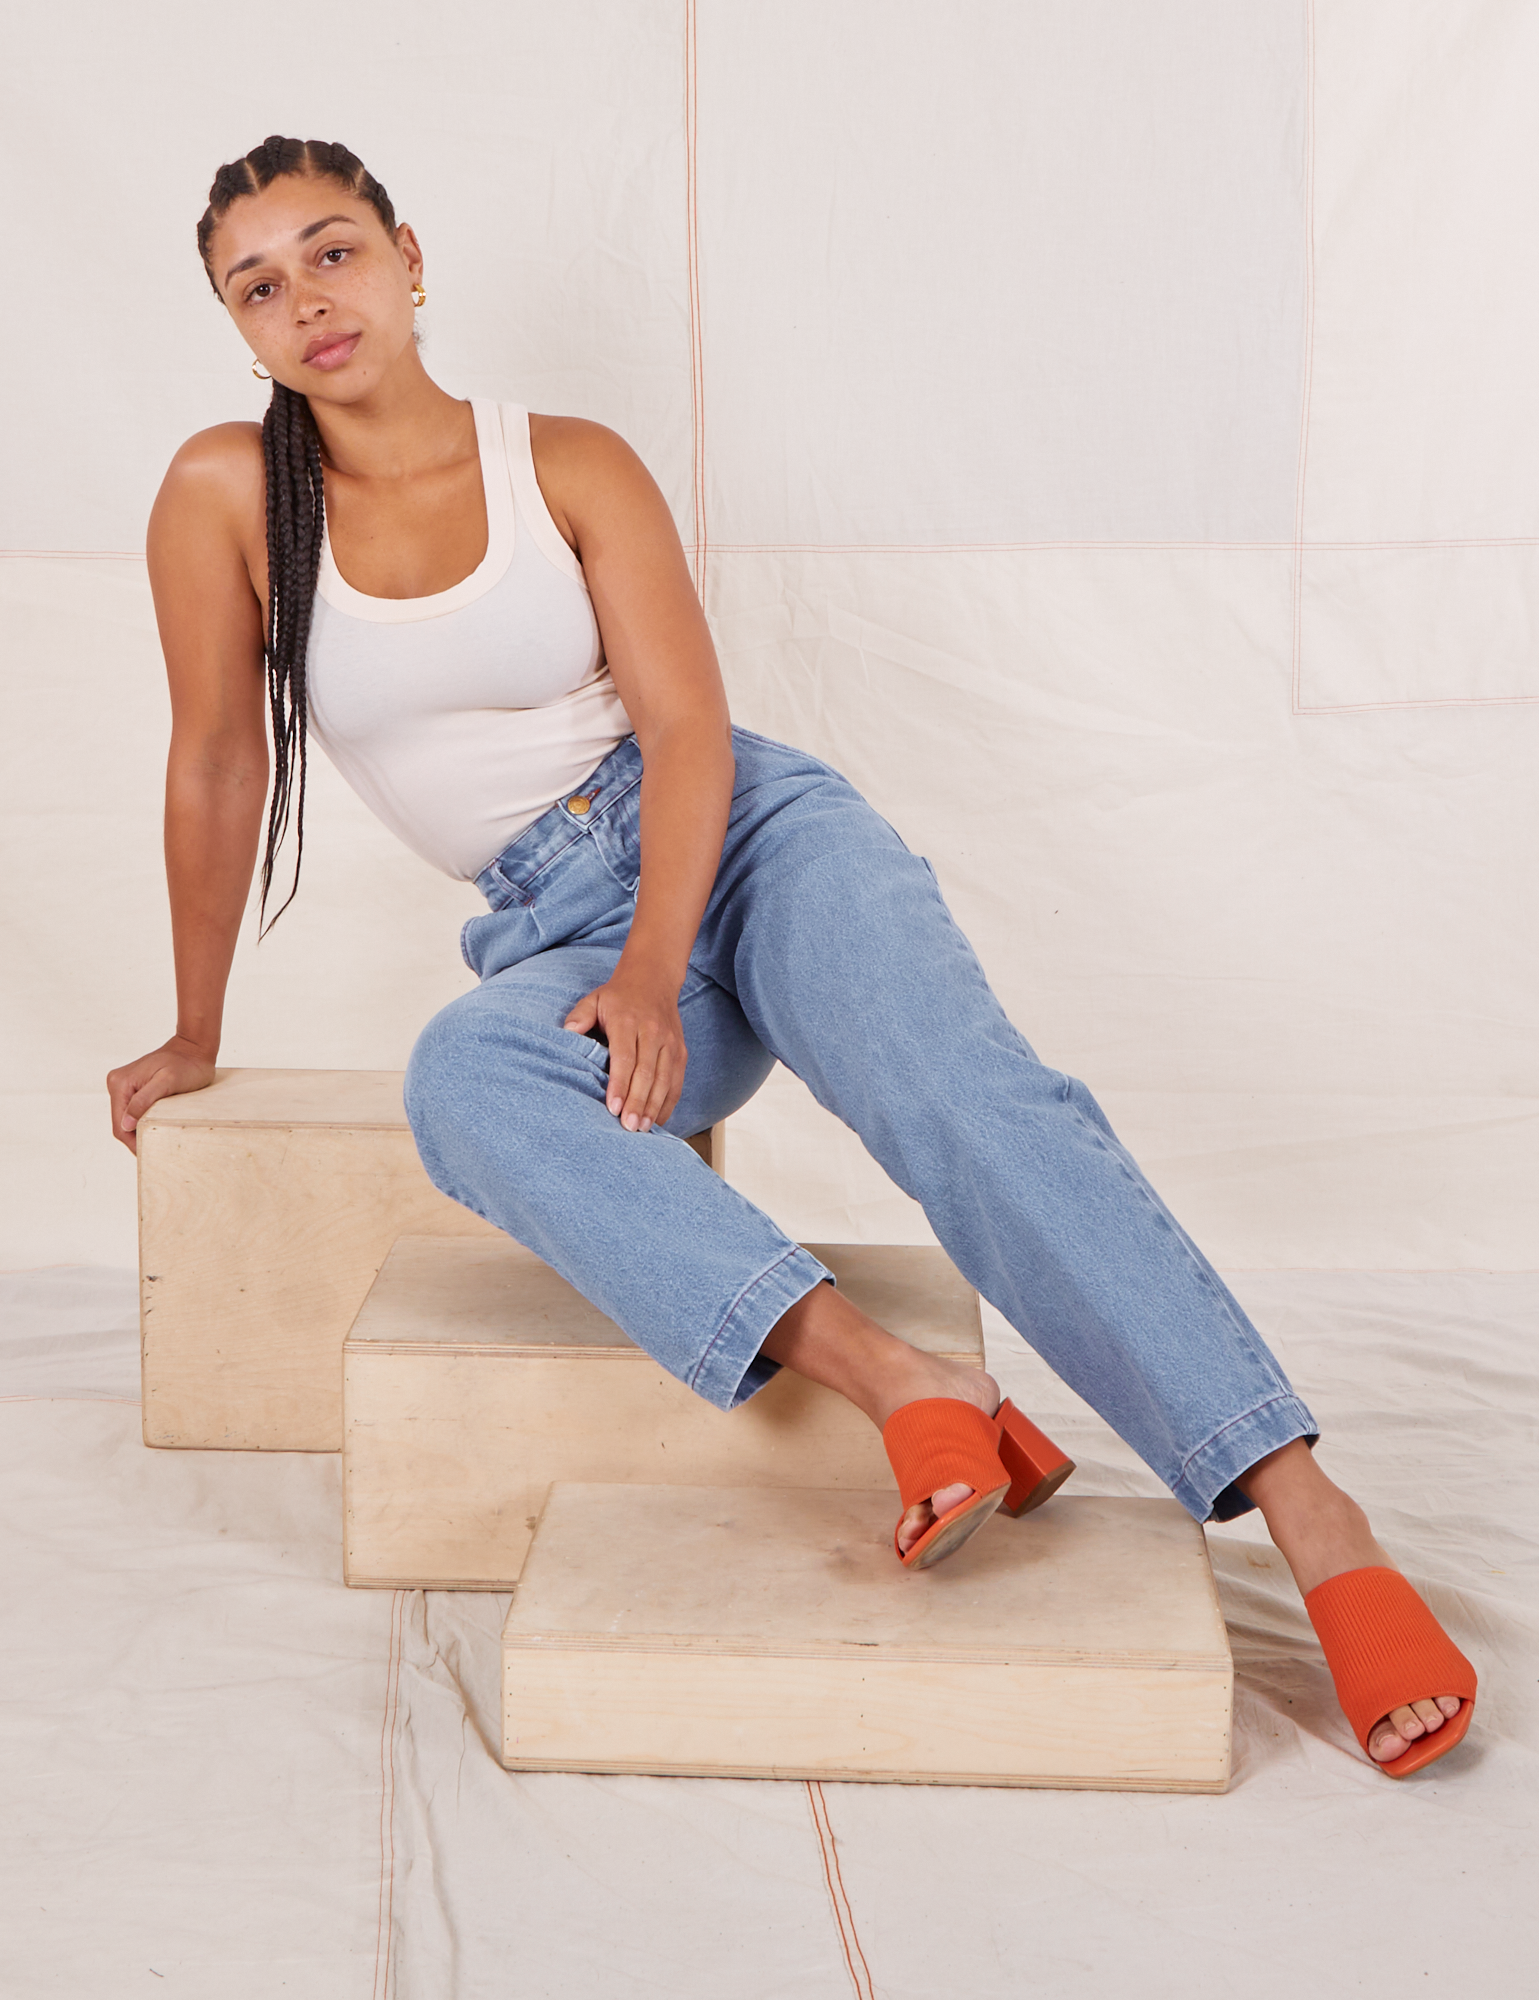 Gabi is sitting on a wooden crate wearing Denim Trouser Jeans in Light Wash and Tank Top in vintage tee off-white